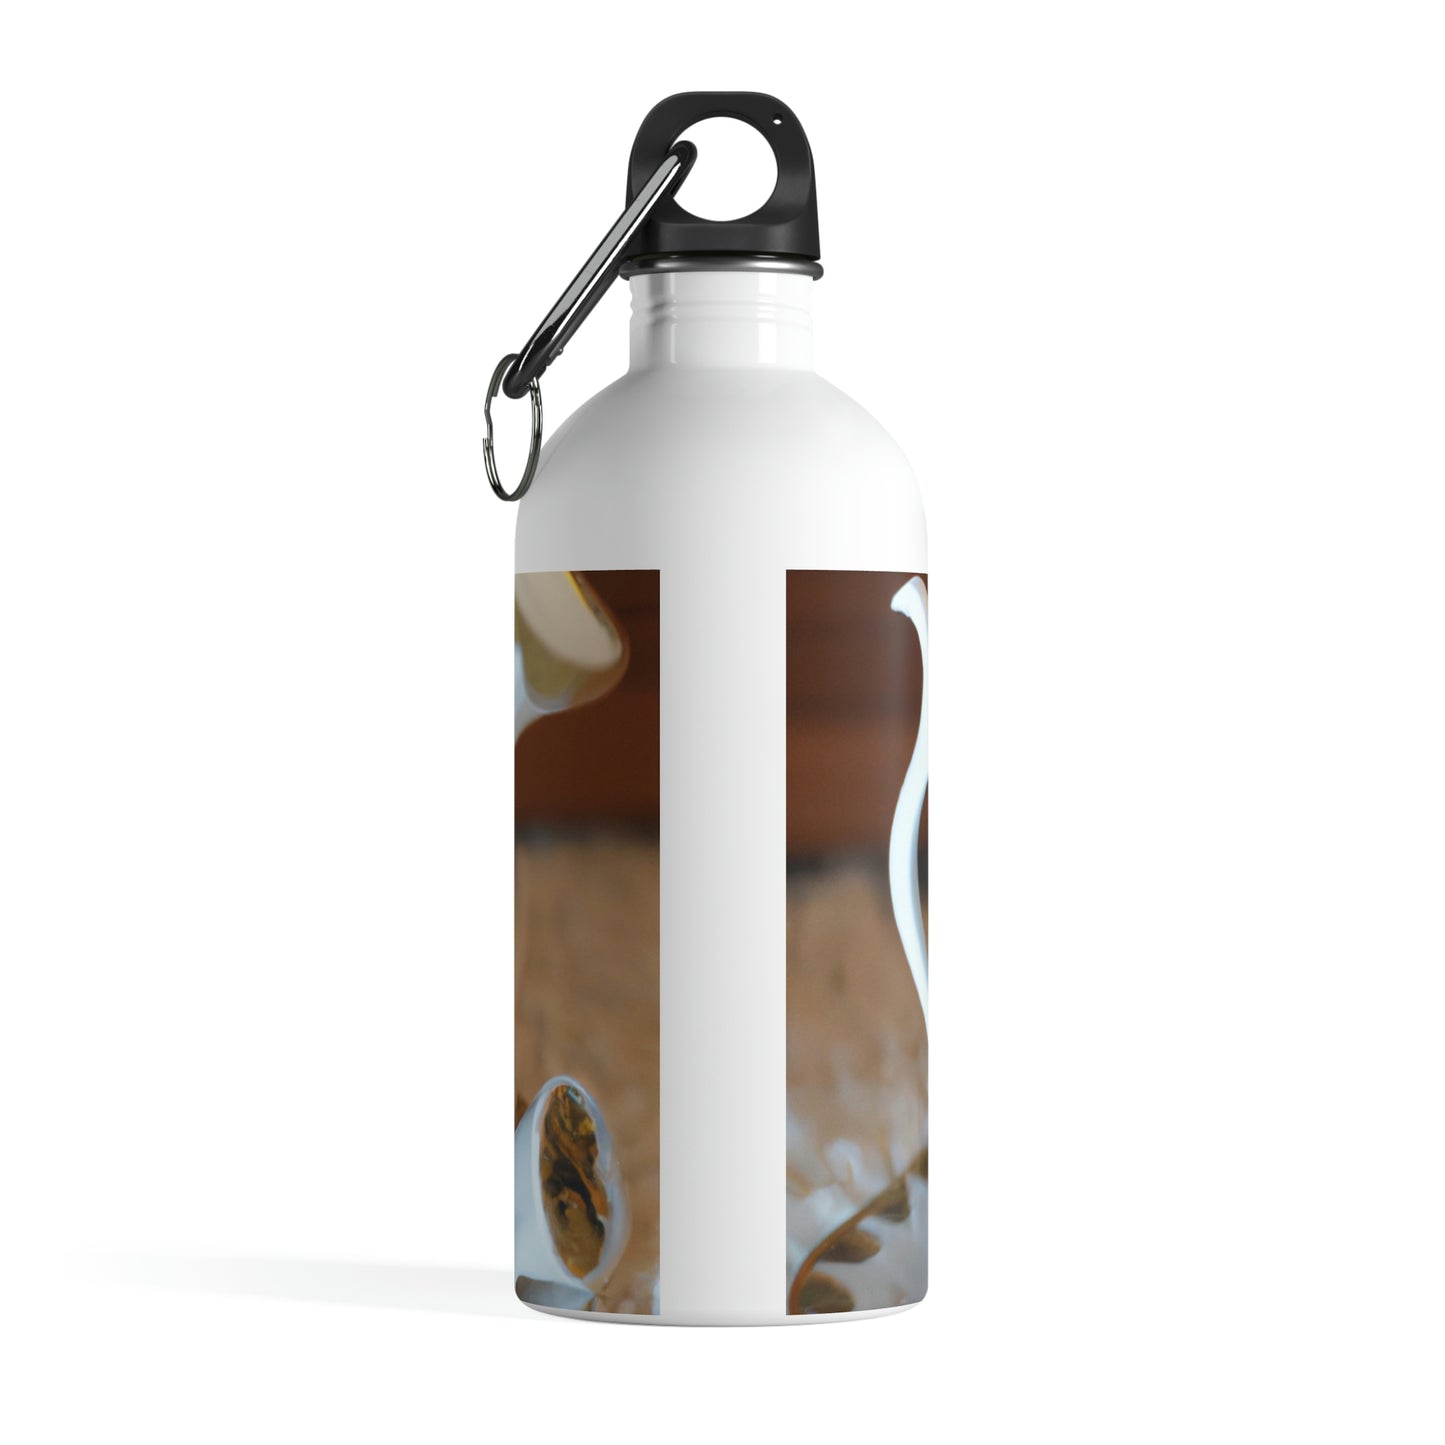 "A Cup of Comfort" - The Alien Stainless Steel Water Bottle